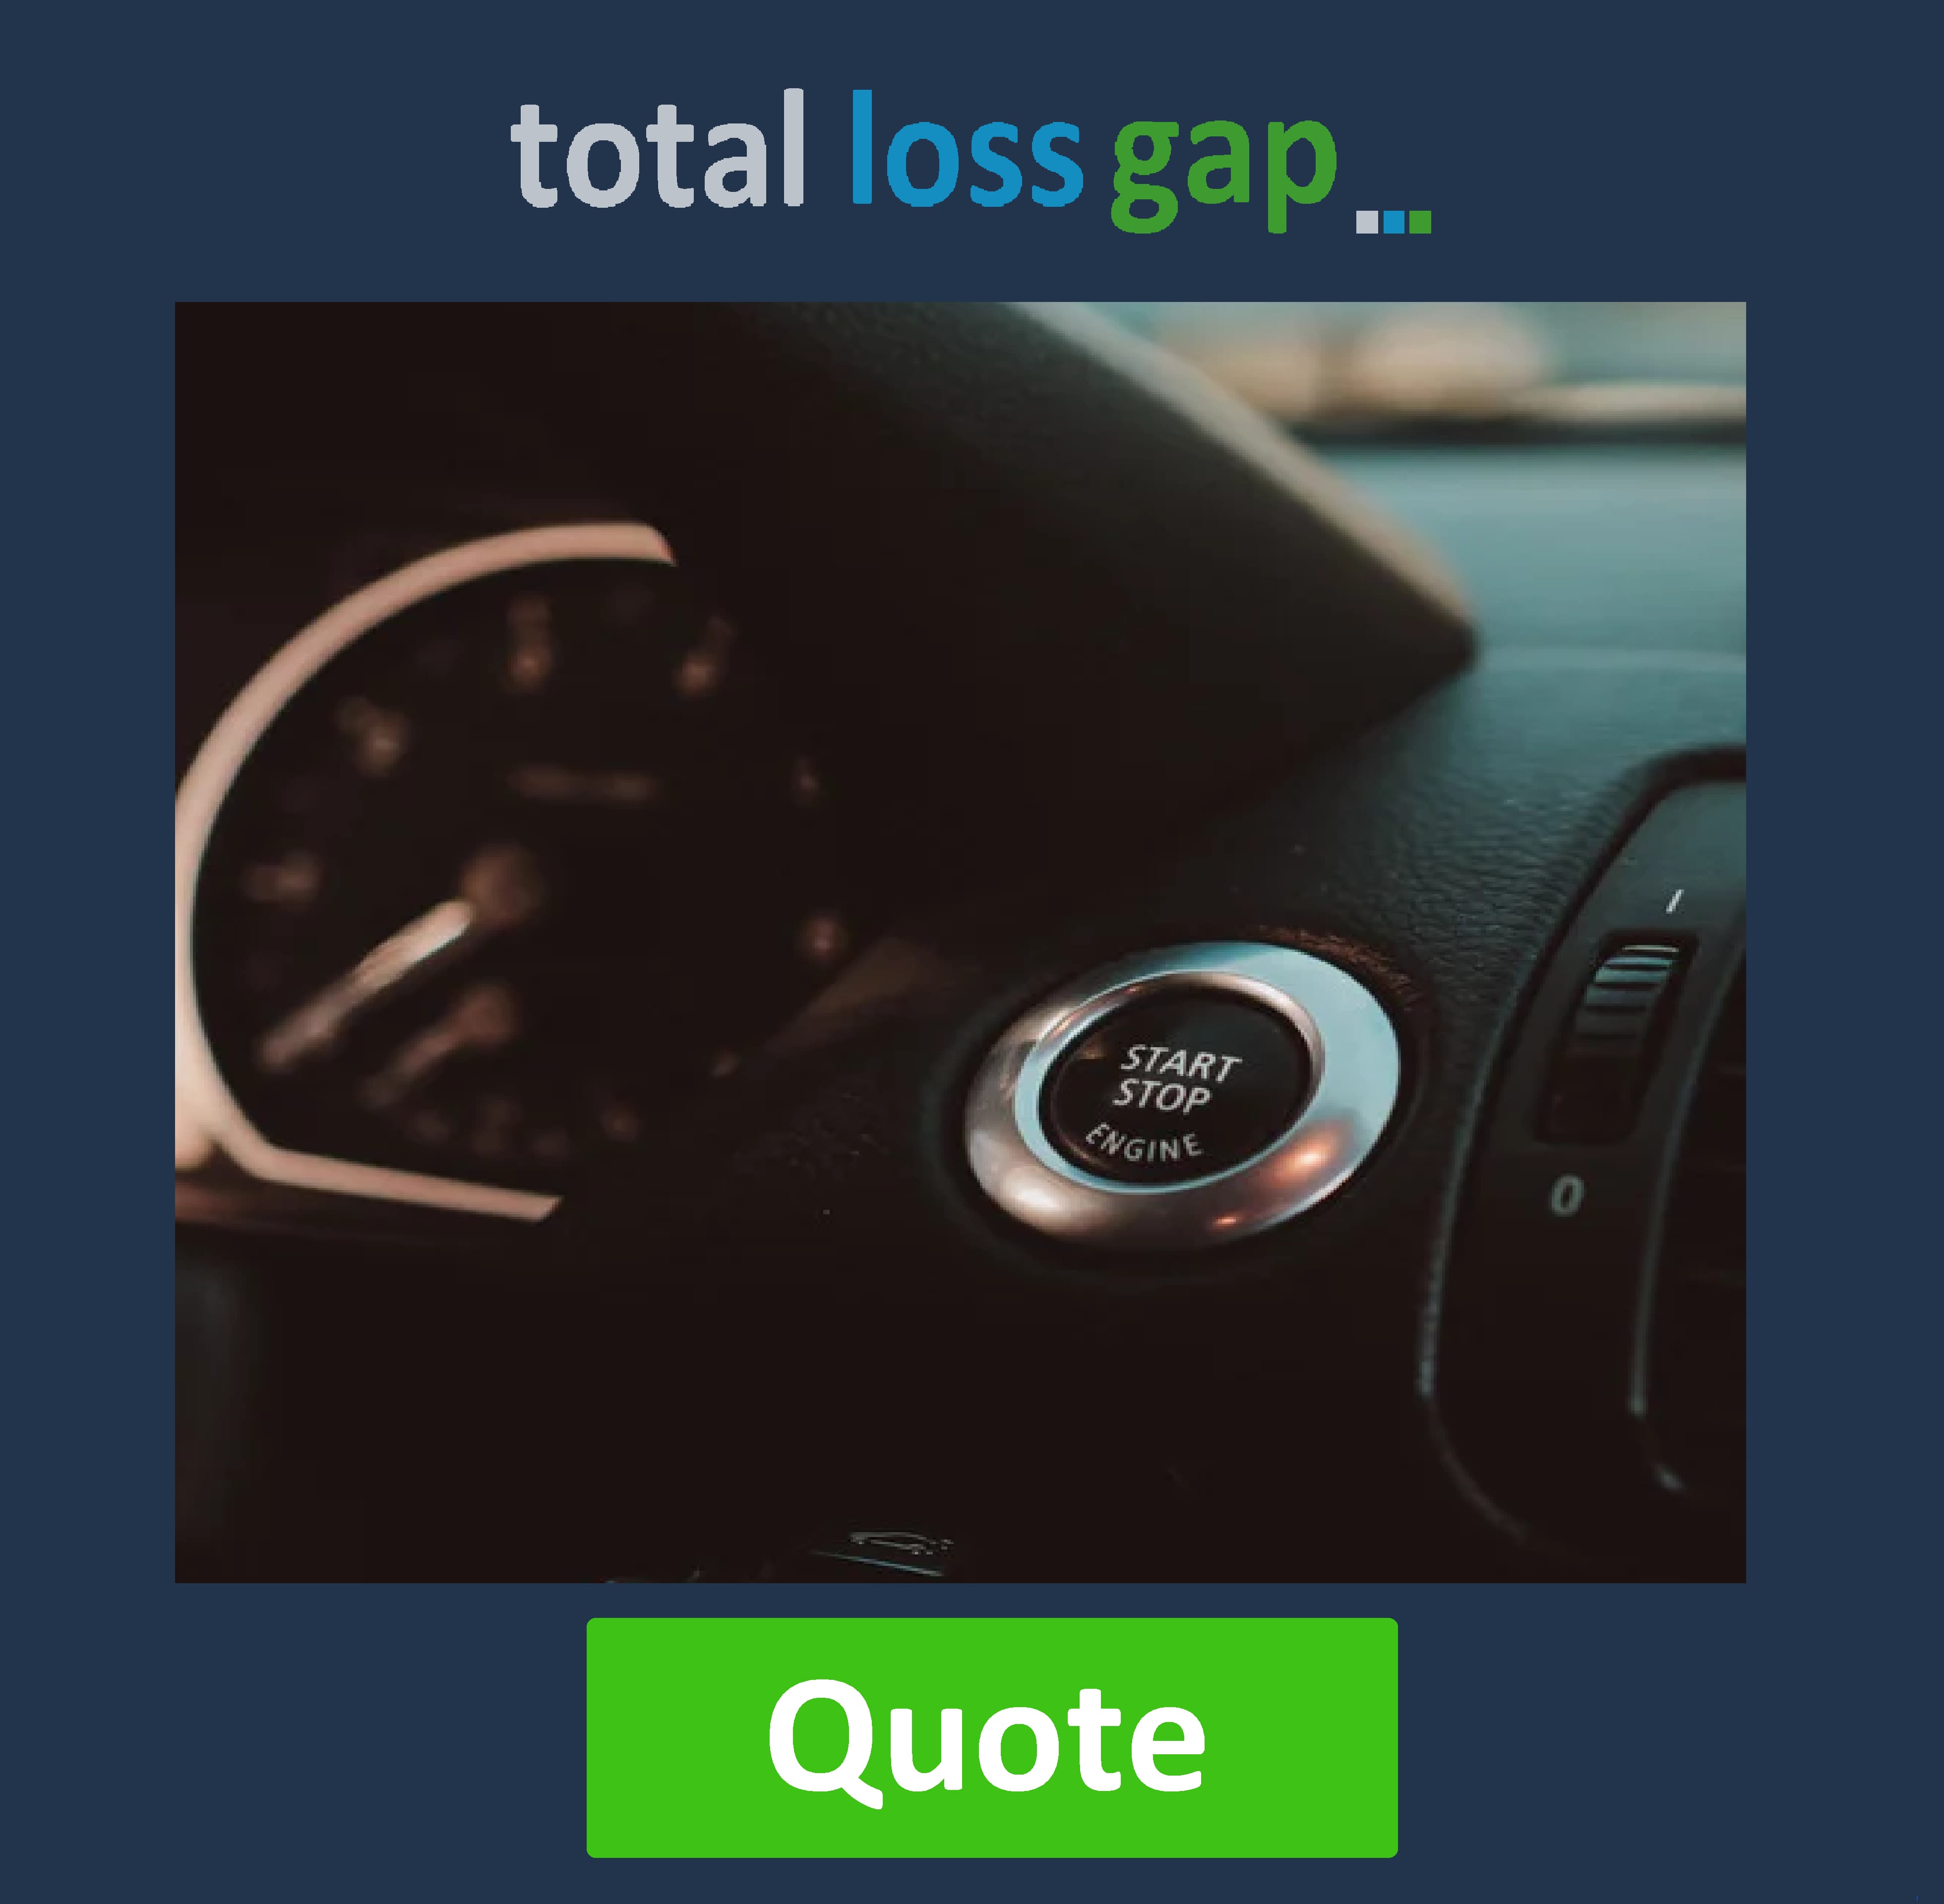 Quick Gap Insurance Quote for your BMW